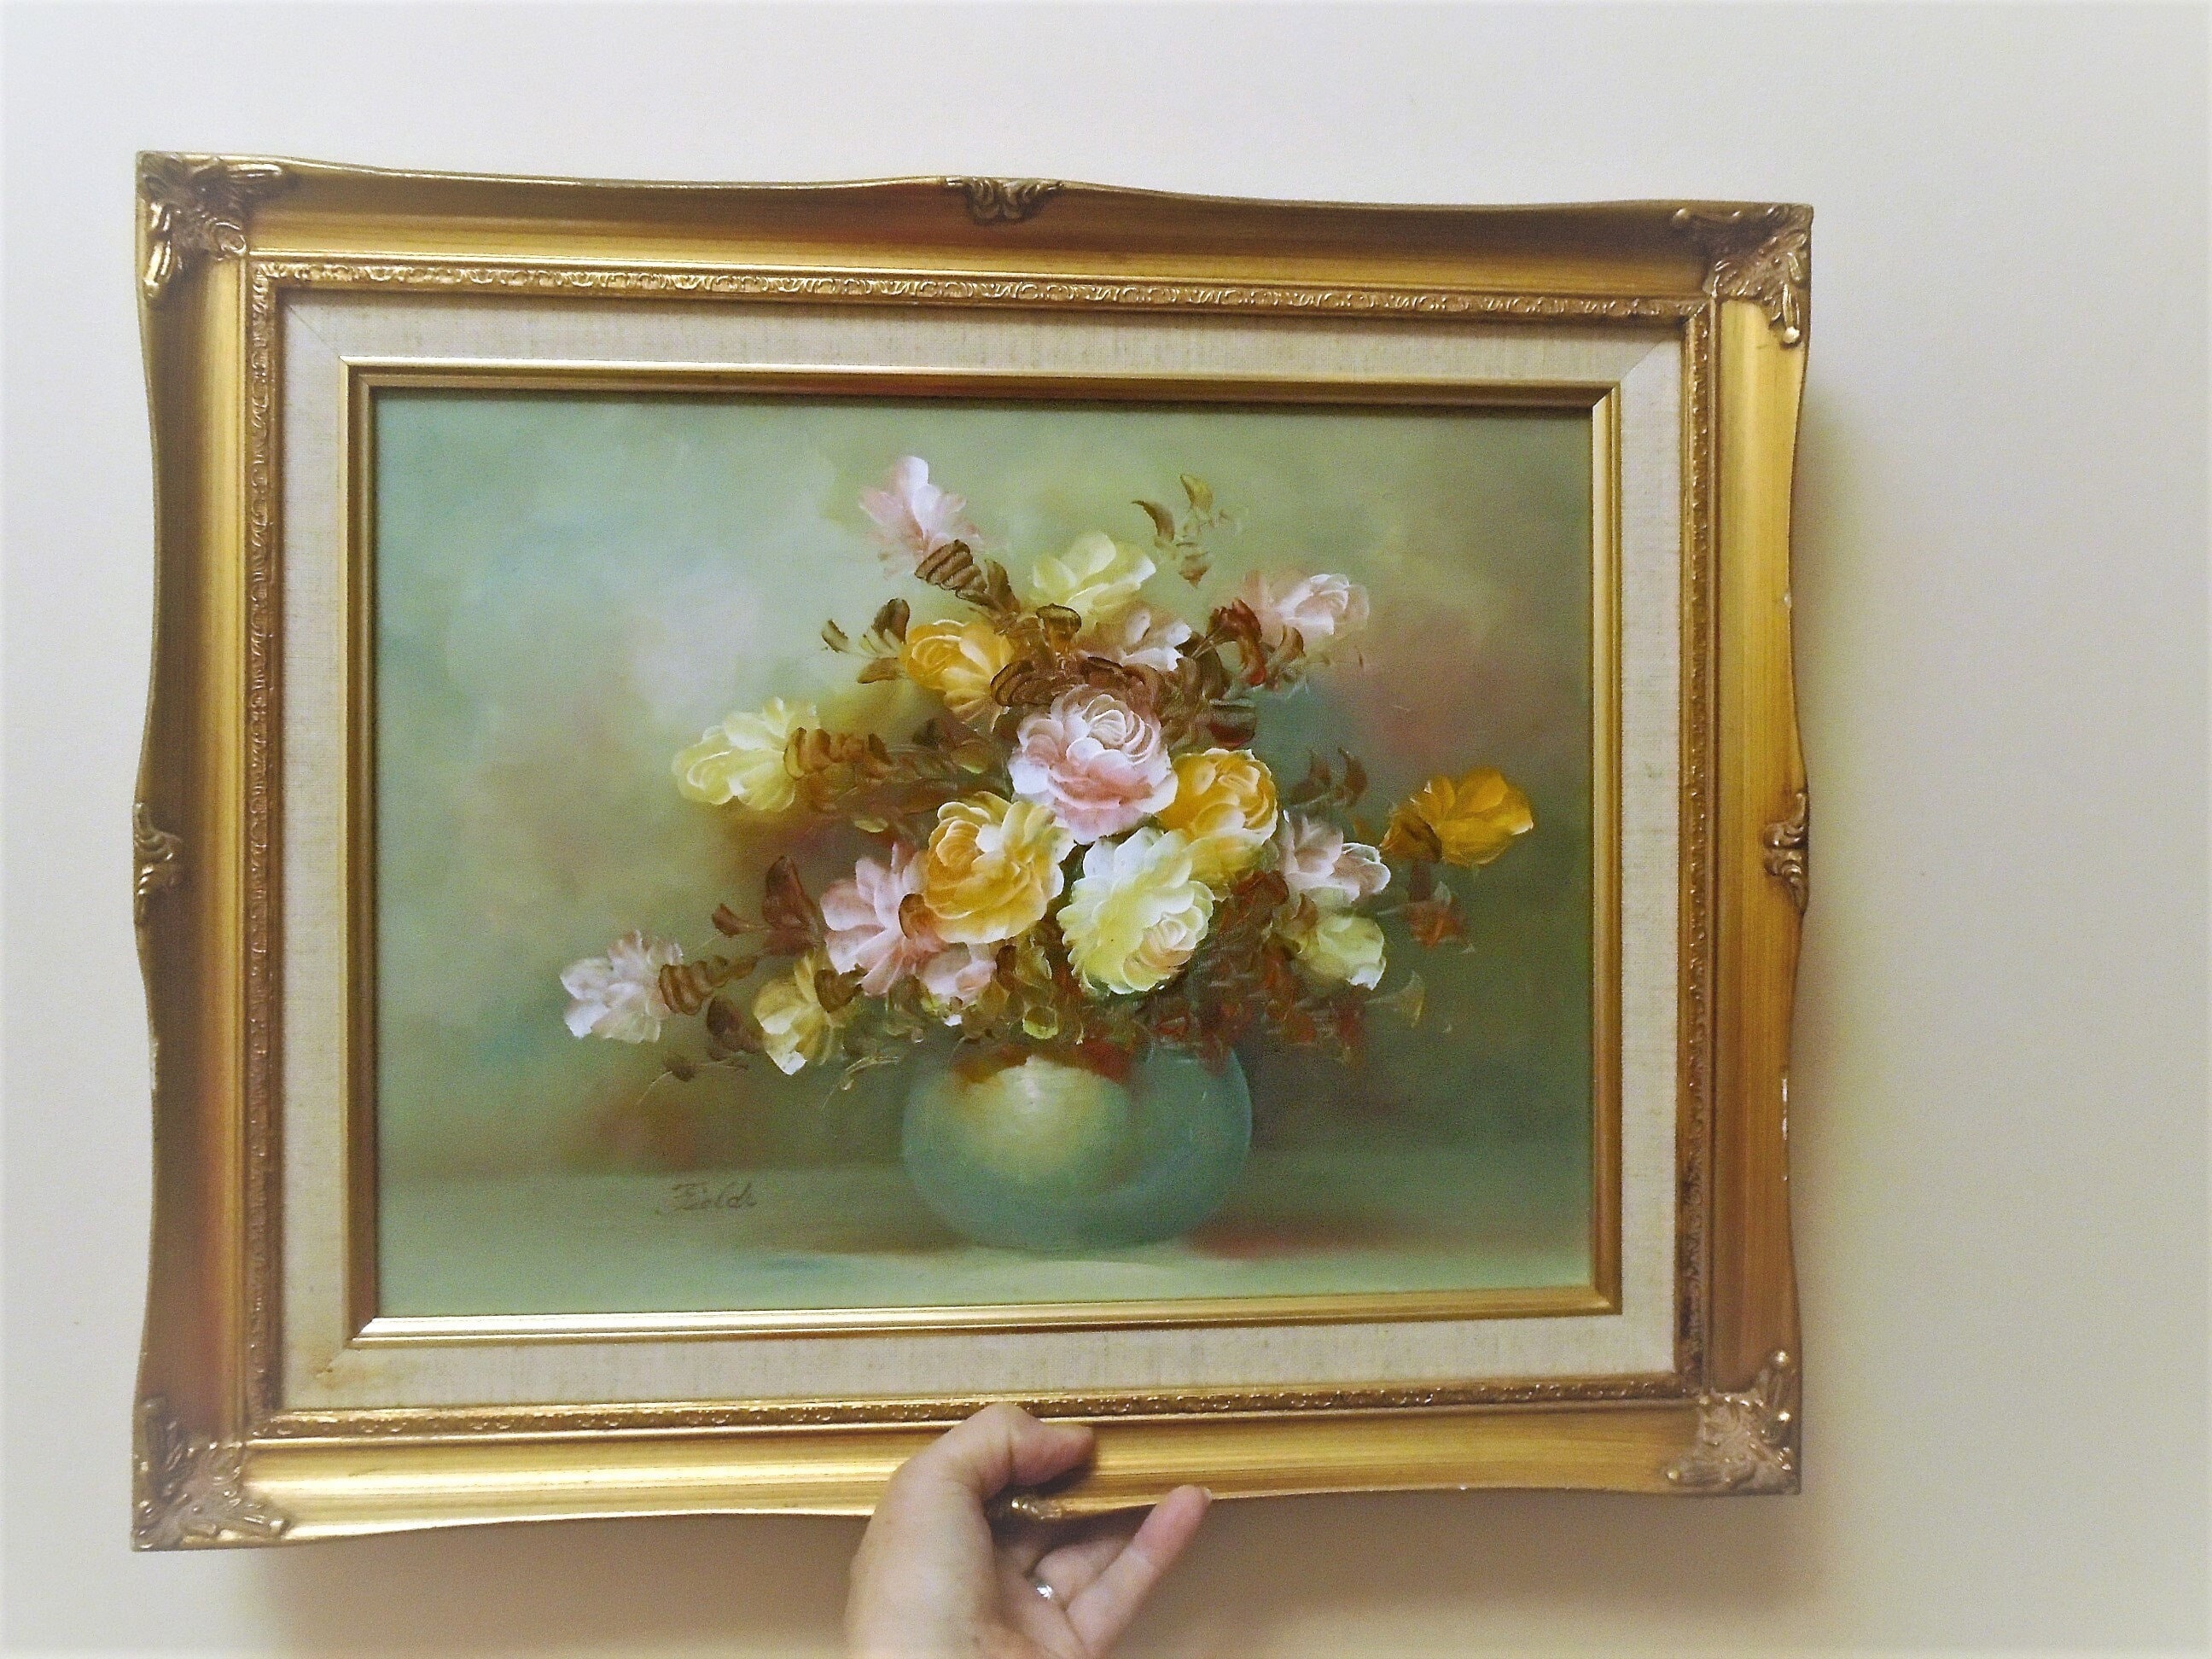 Rima - Classical Still Life Study Of Flowers in Vase Elaborate Grand Gilt  Frame For Sale at 1stDibs